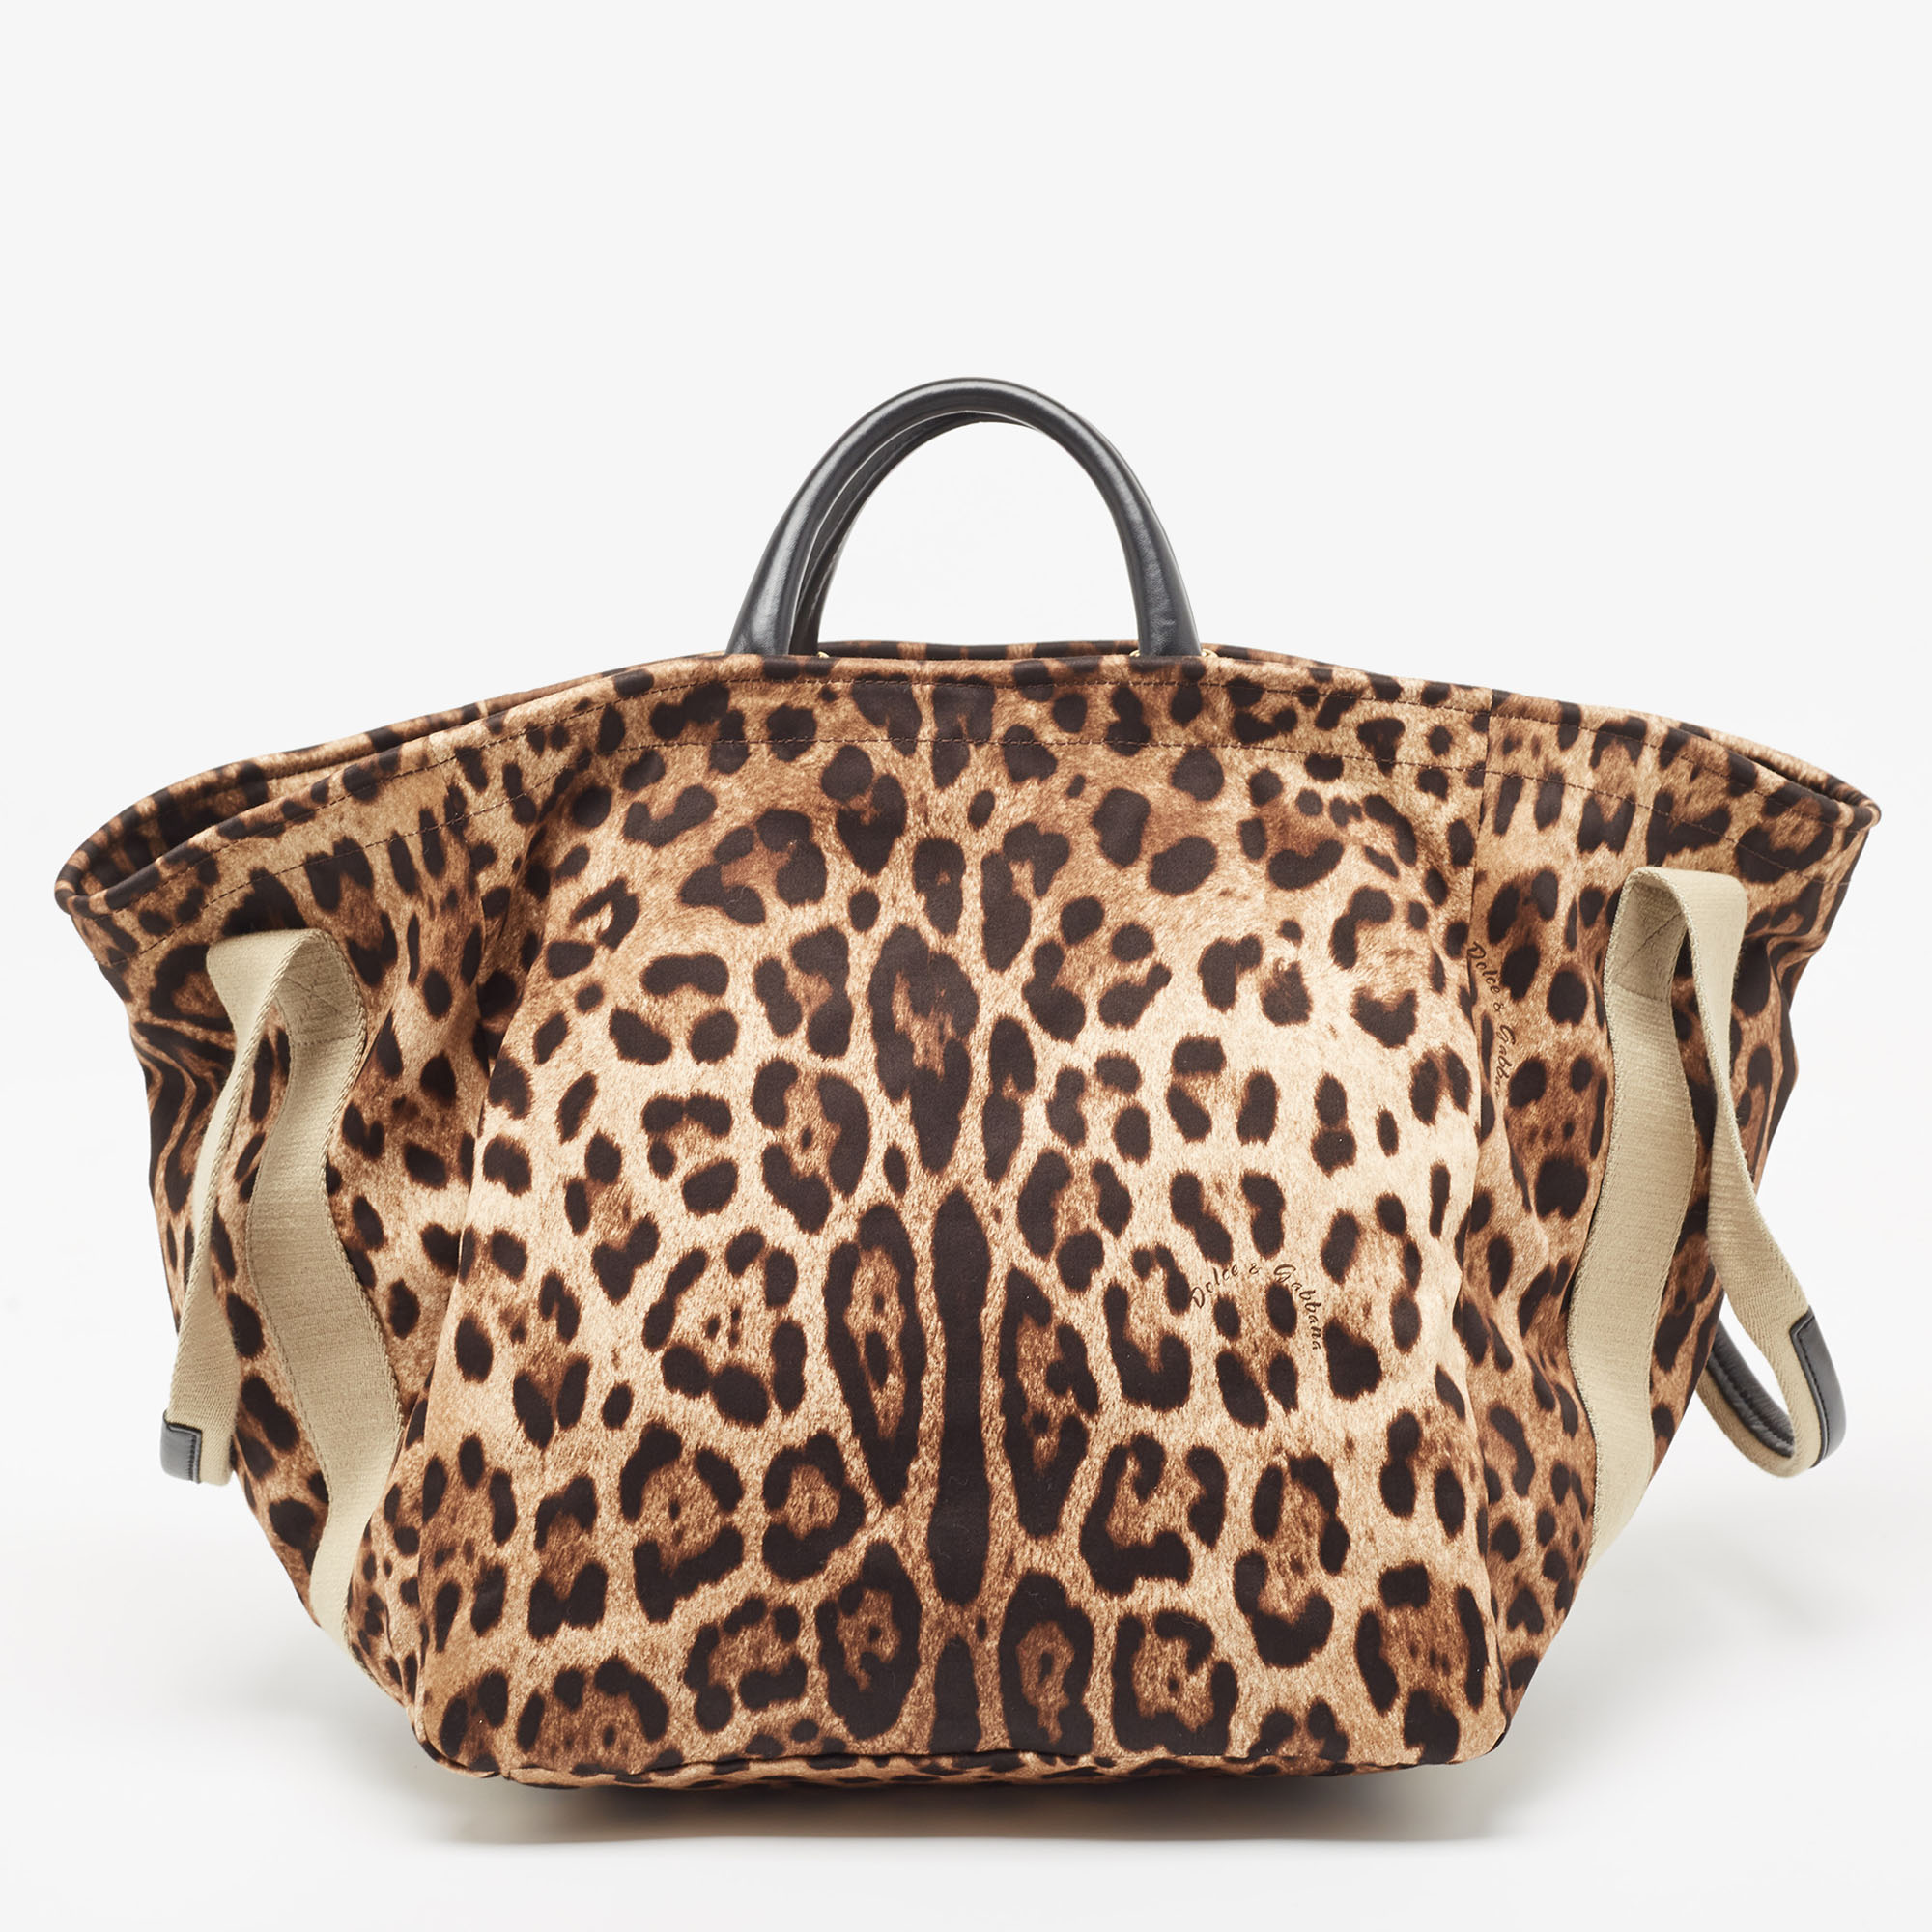 Dolce & Gabbana Beige Brown/Black Leopard Print Fabric Front Pouch Tote